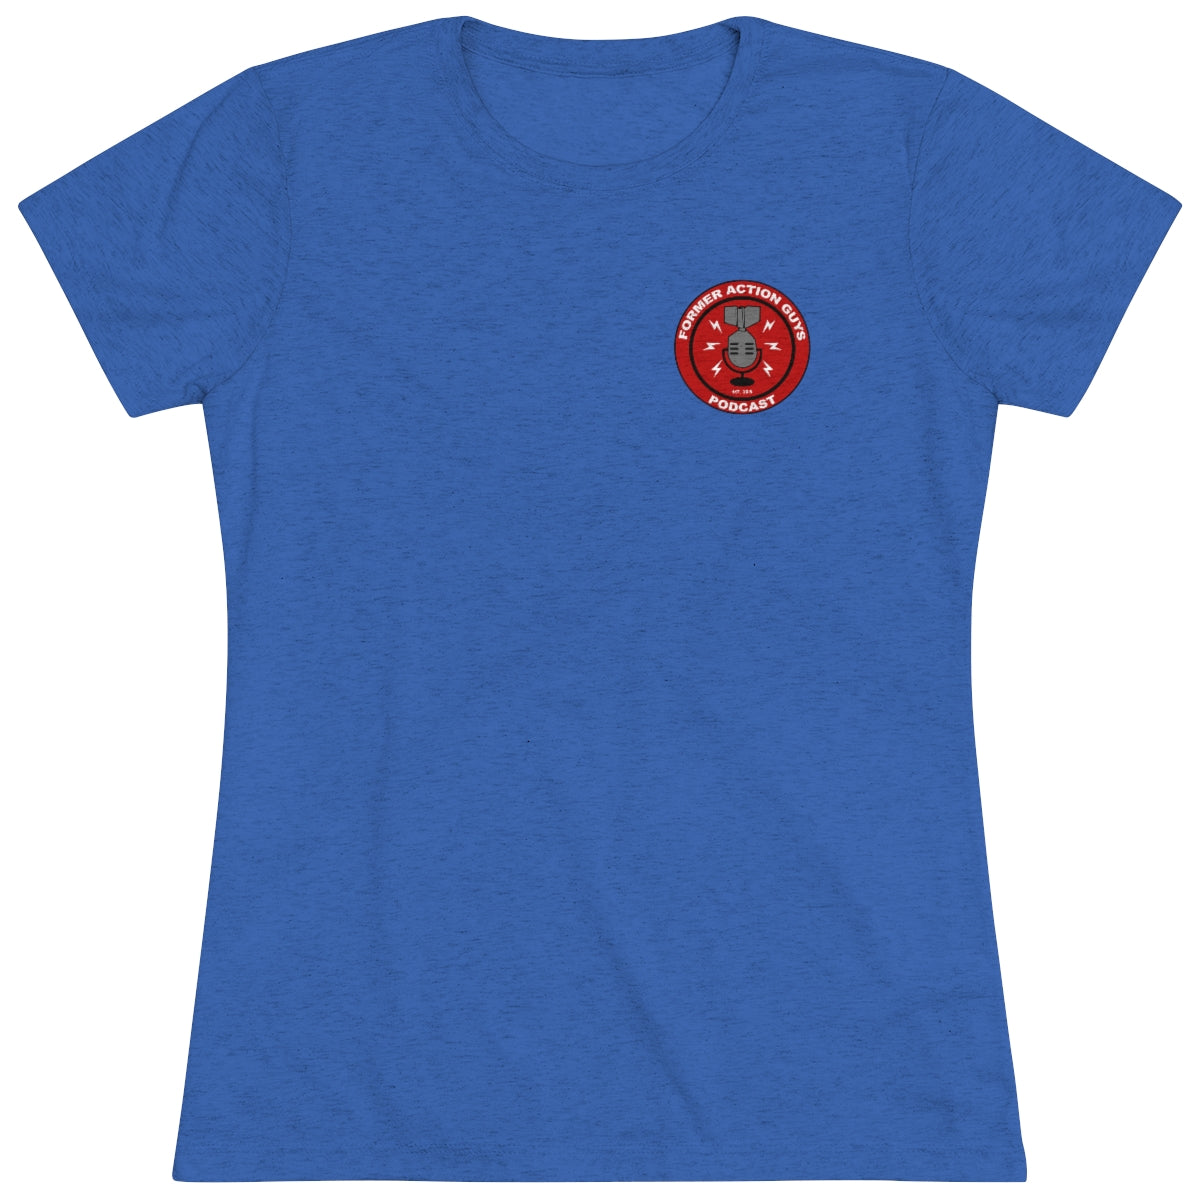 Women's Former Action Guys Podcast Athletic Tee